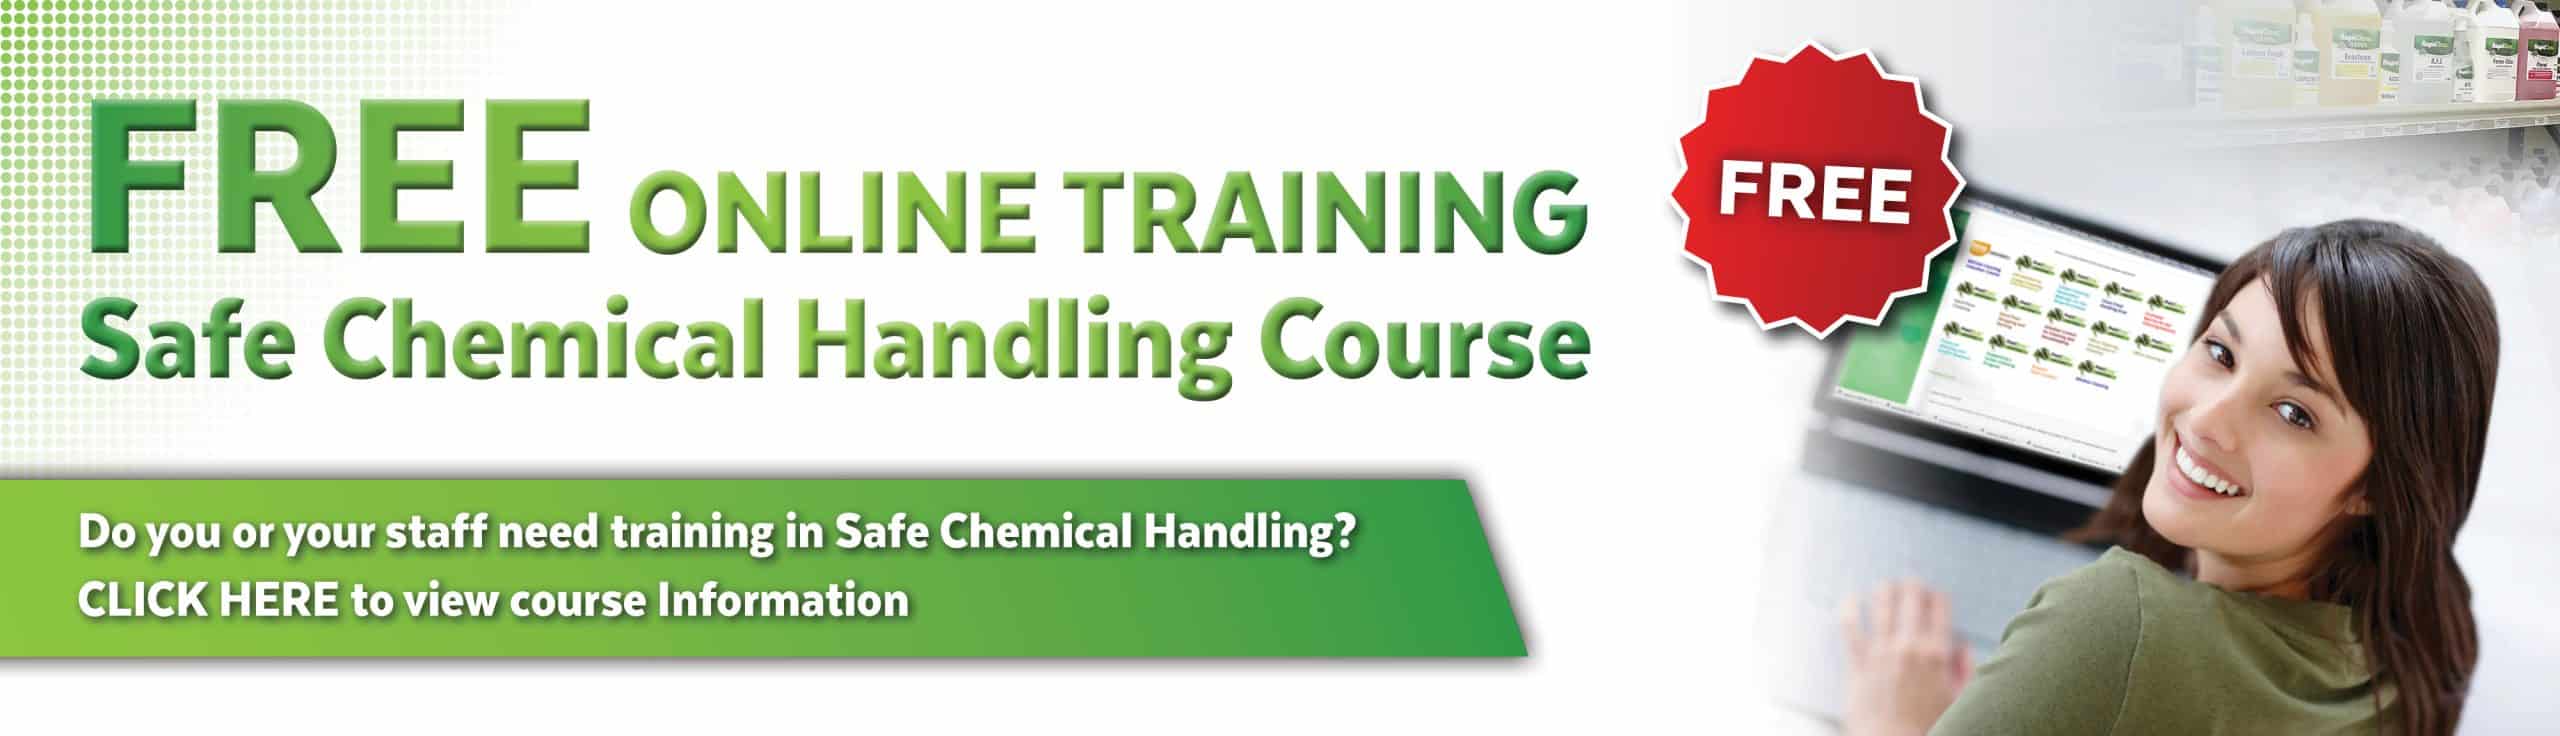 FREE Safe Chemical Handling Course